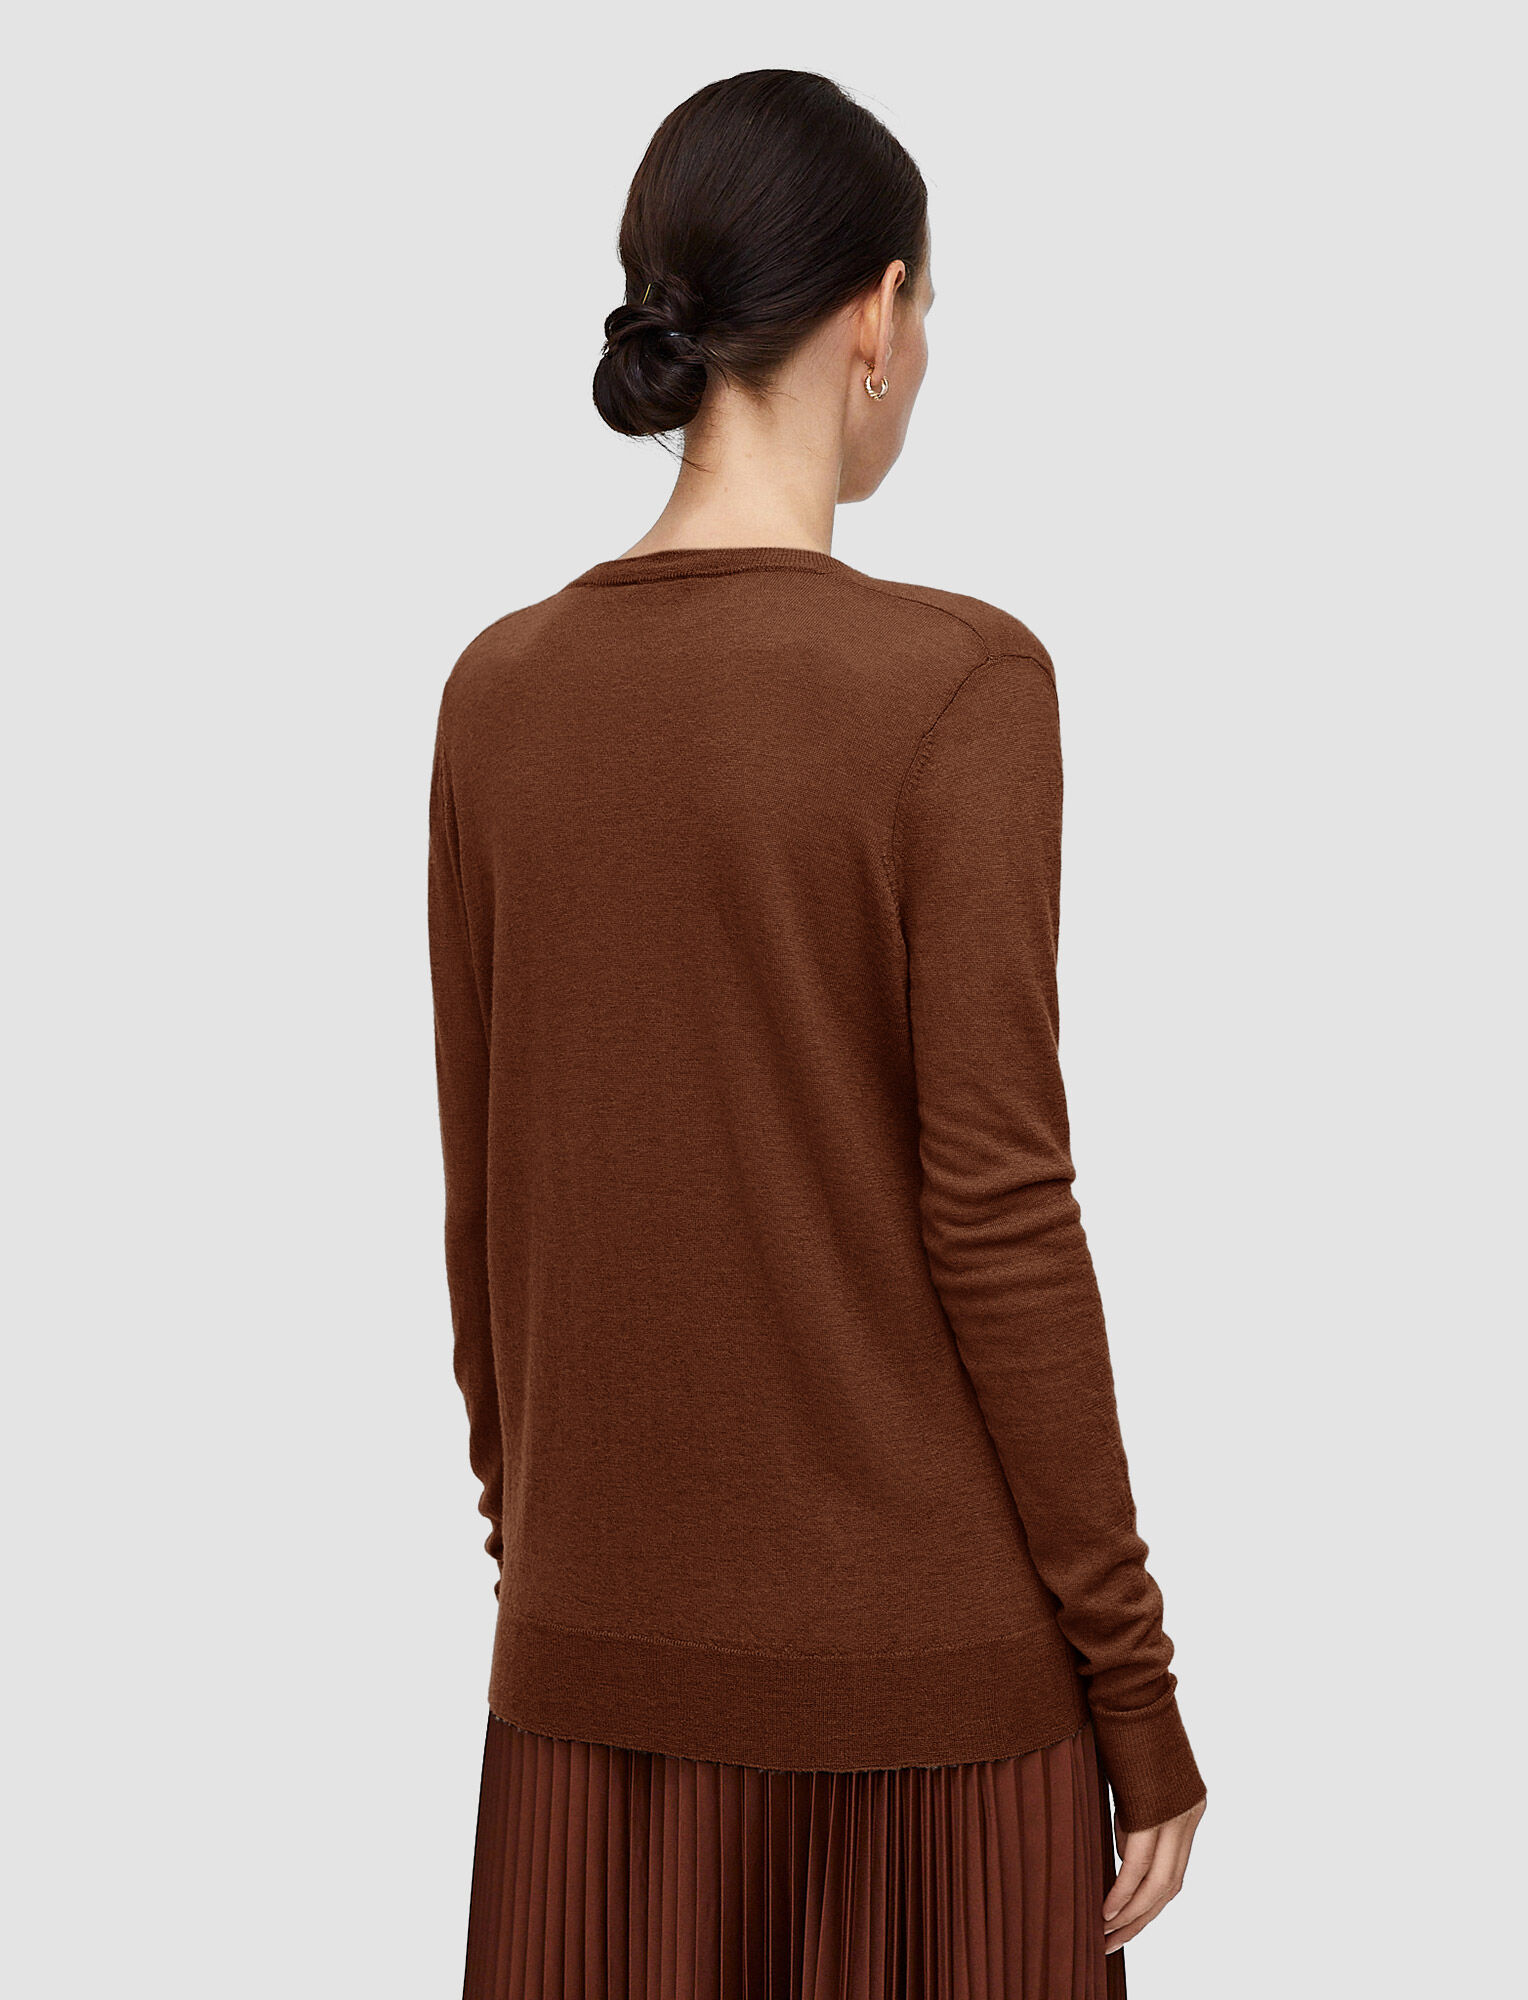 The Cashair V Neck Jumper is a relaxed fit, lightweight knit jumper, crafted from a pure cashmere